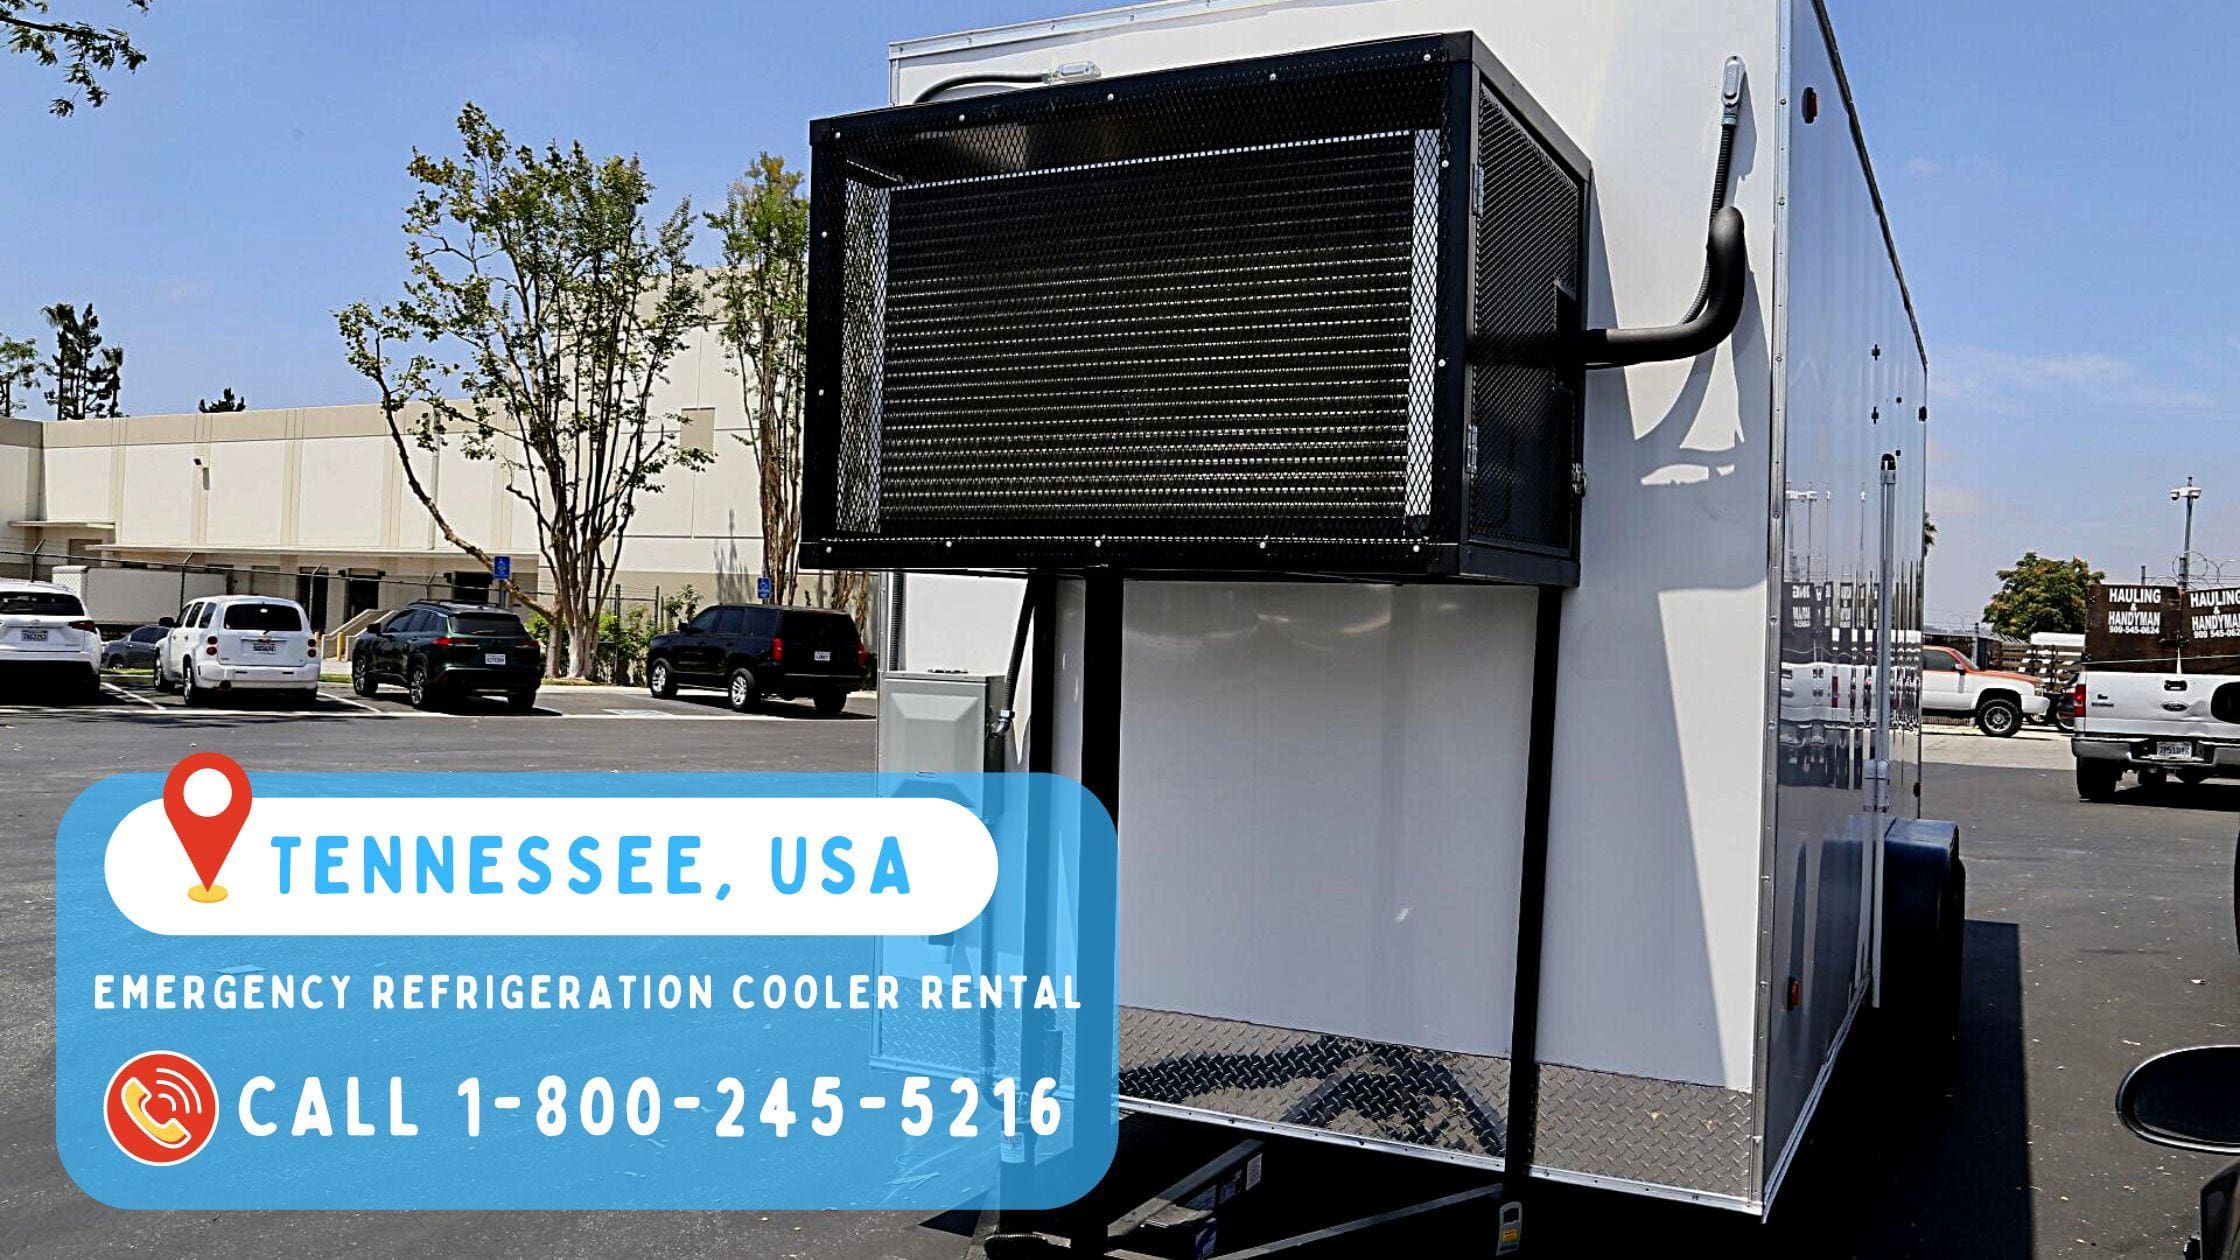 Emergency Refrigeration Cooler Rental in Tennessee